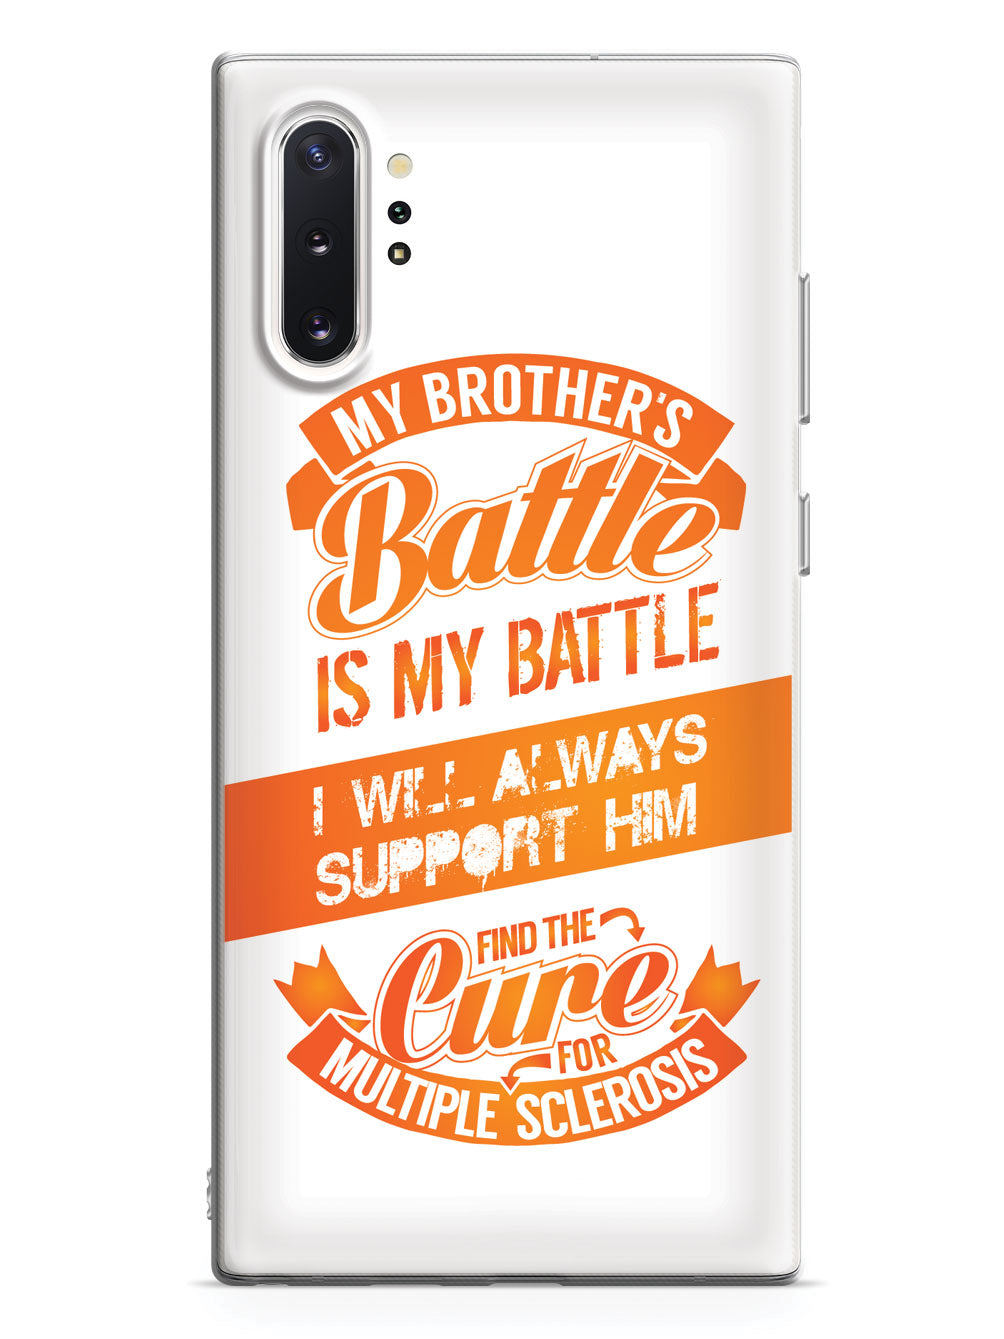 My Brother's Battle - Multiple Sclerosis Awareness/Support Case